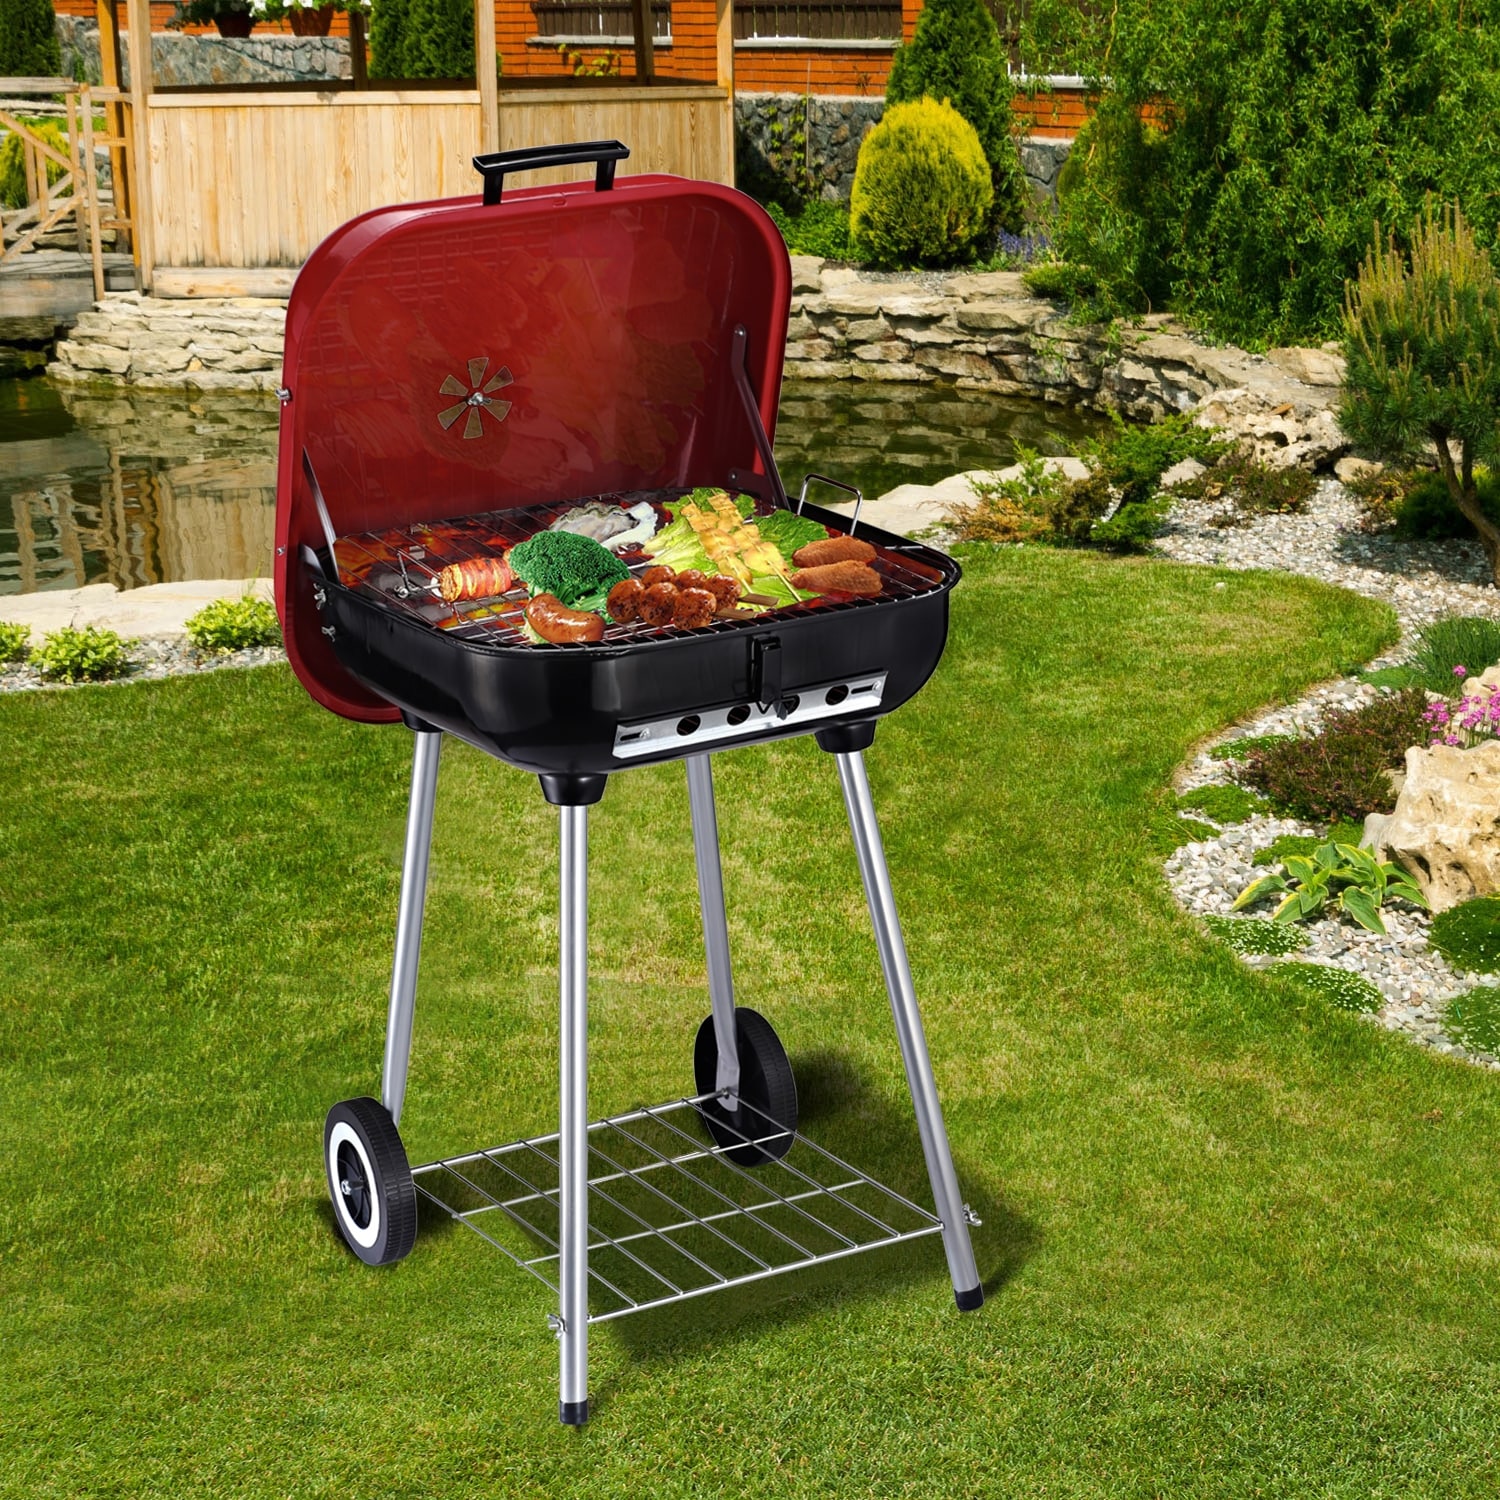 Outsunny Steel Porcelain Portable Outdoor Charcoal Barbecue Grill with Wheels